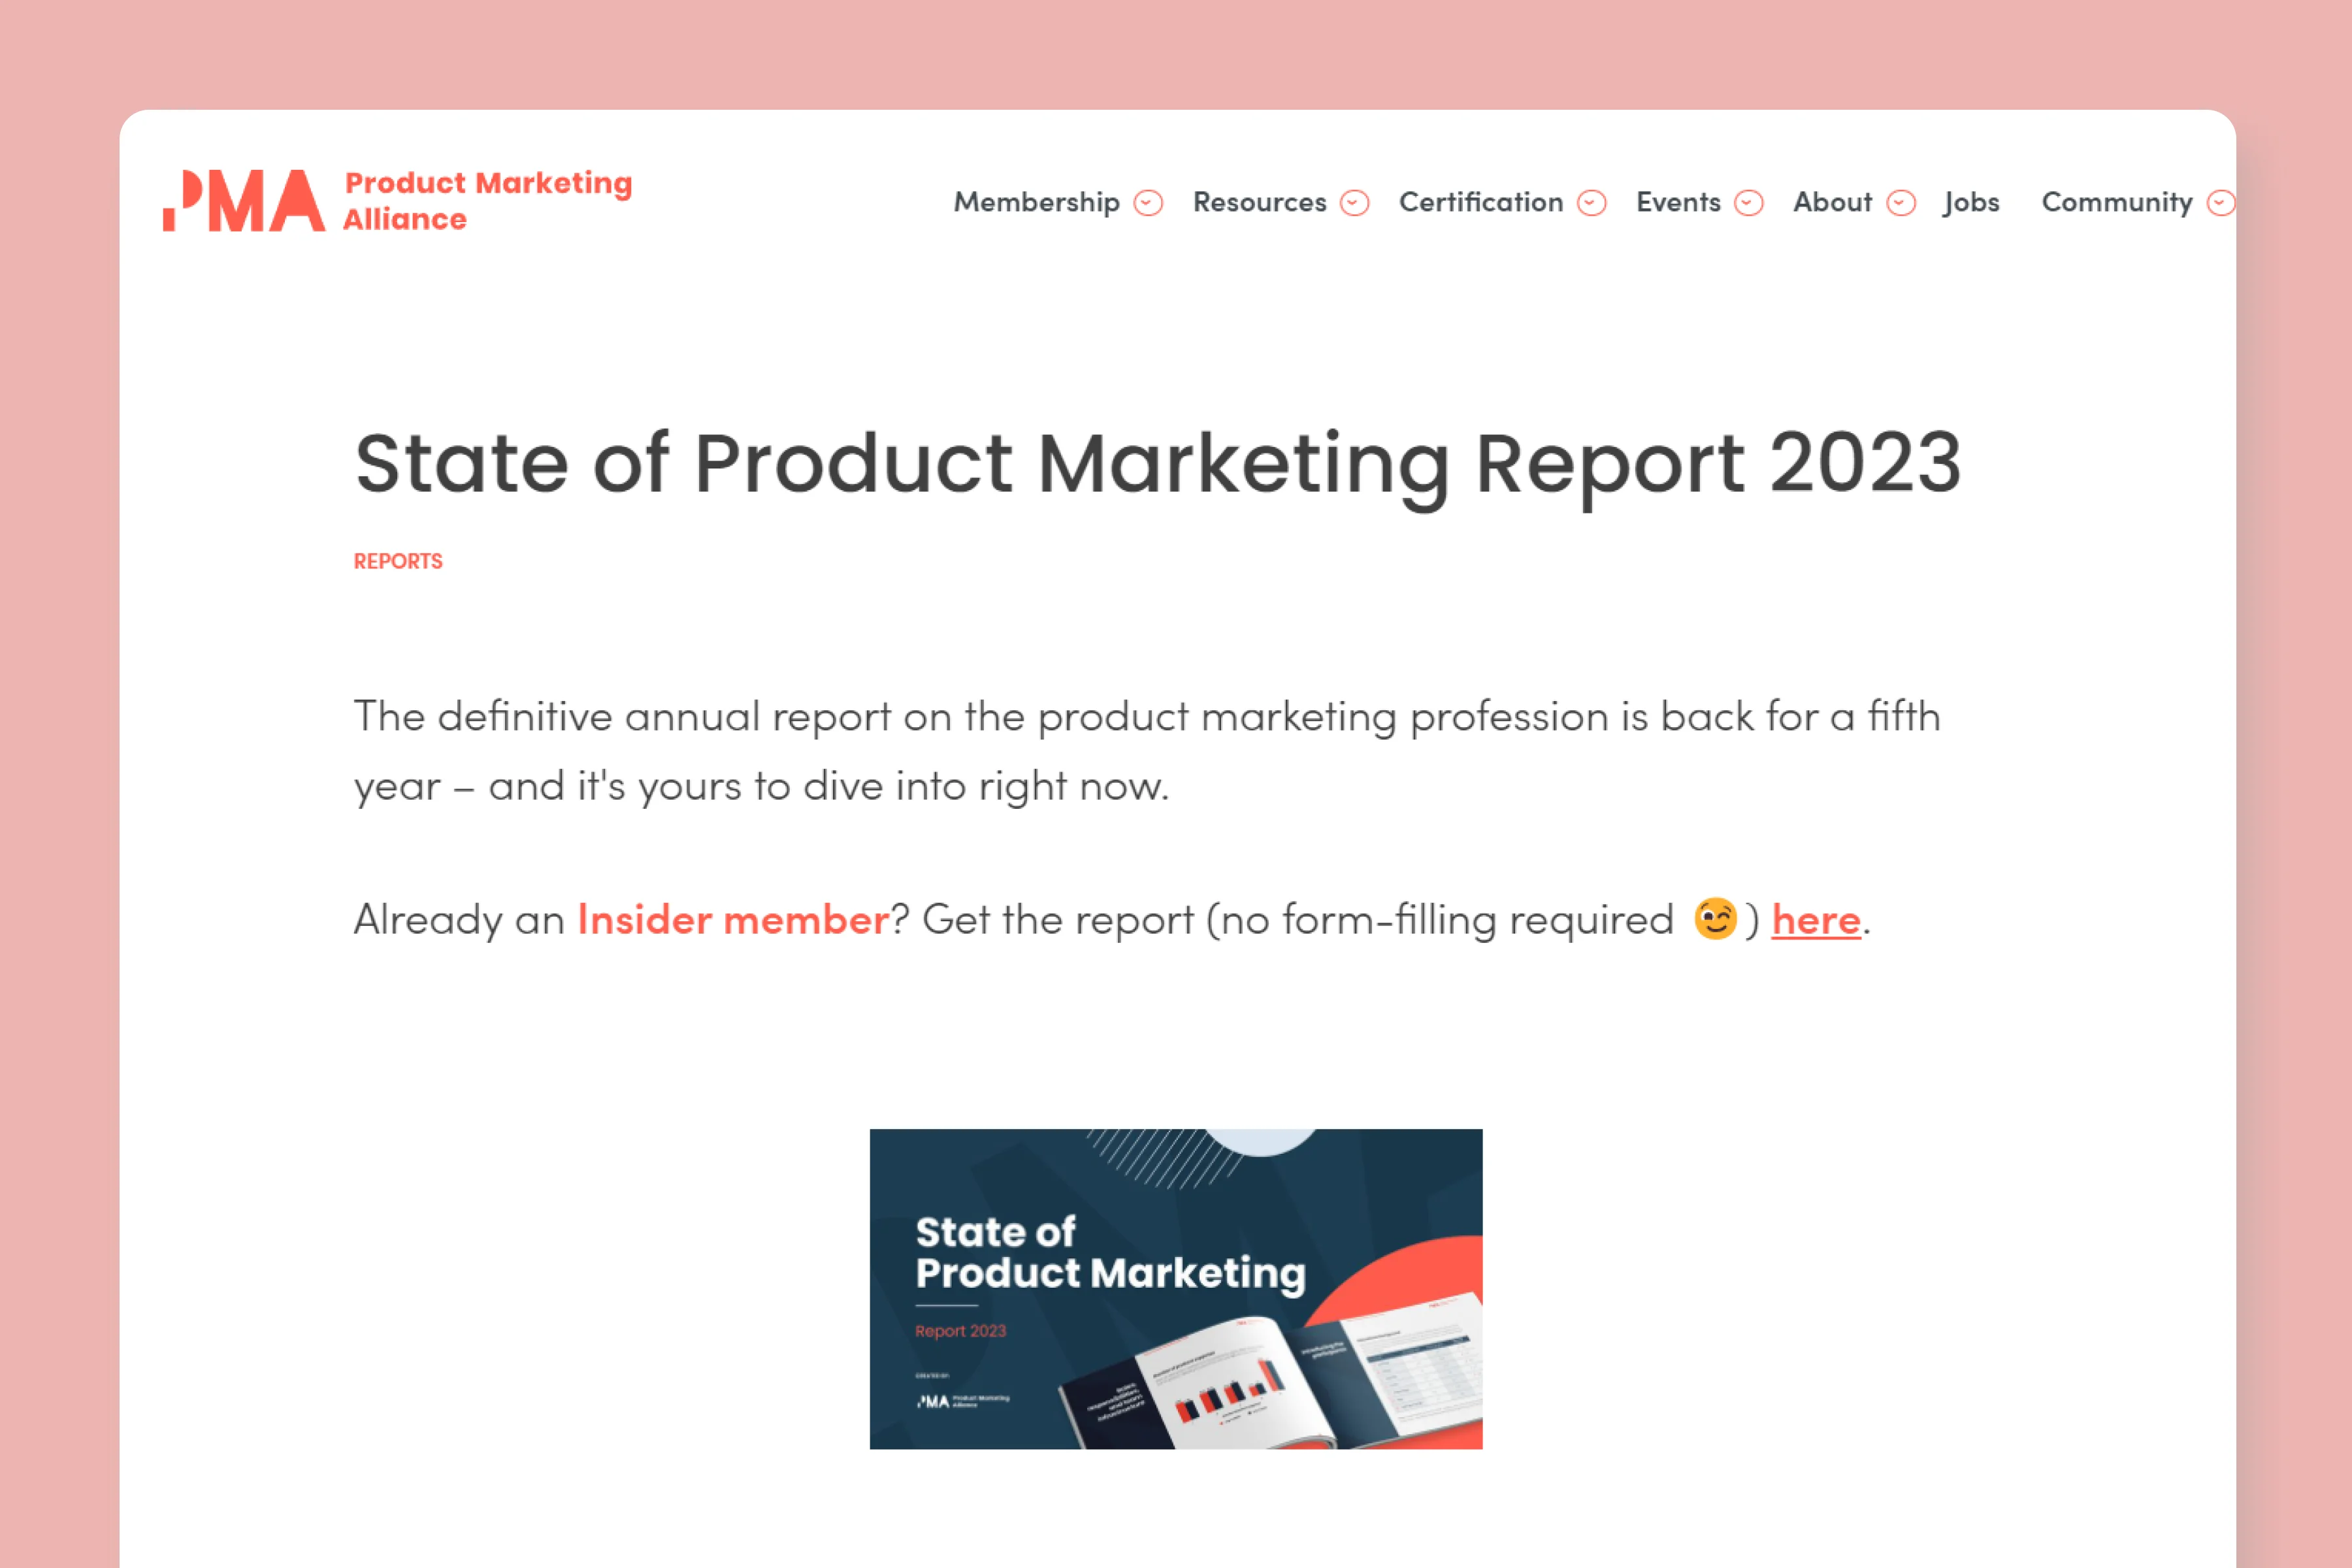 PMA - State of Product Marketing Report 2023